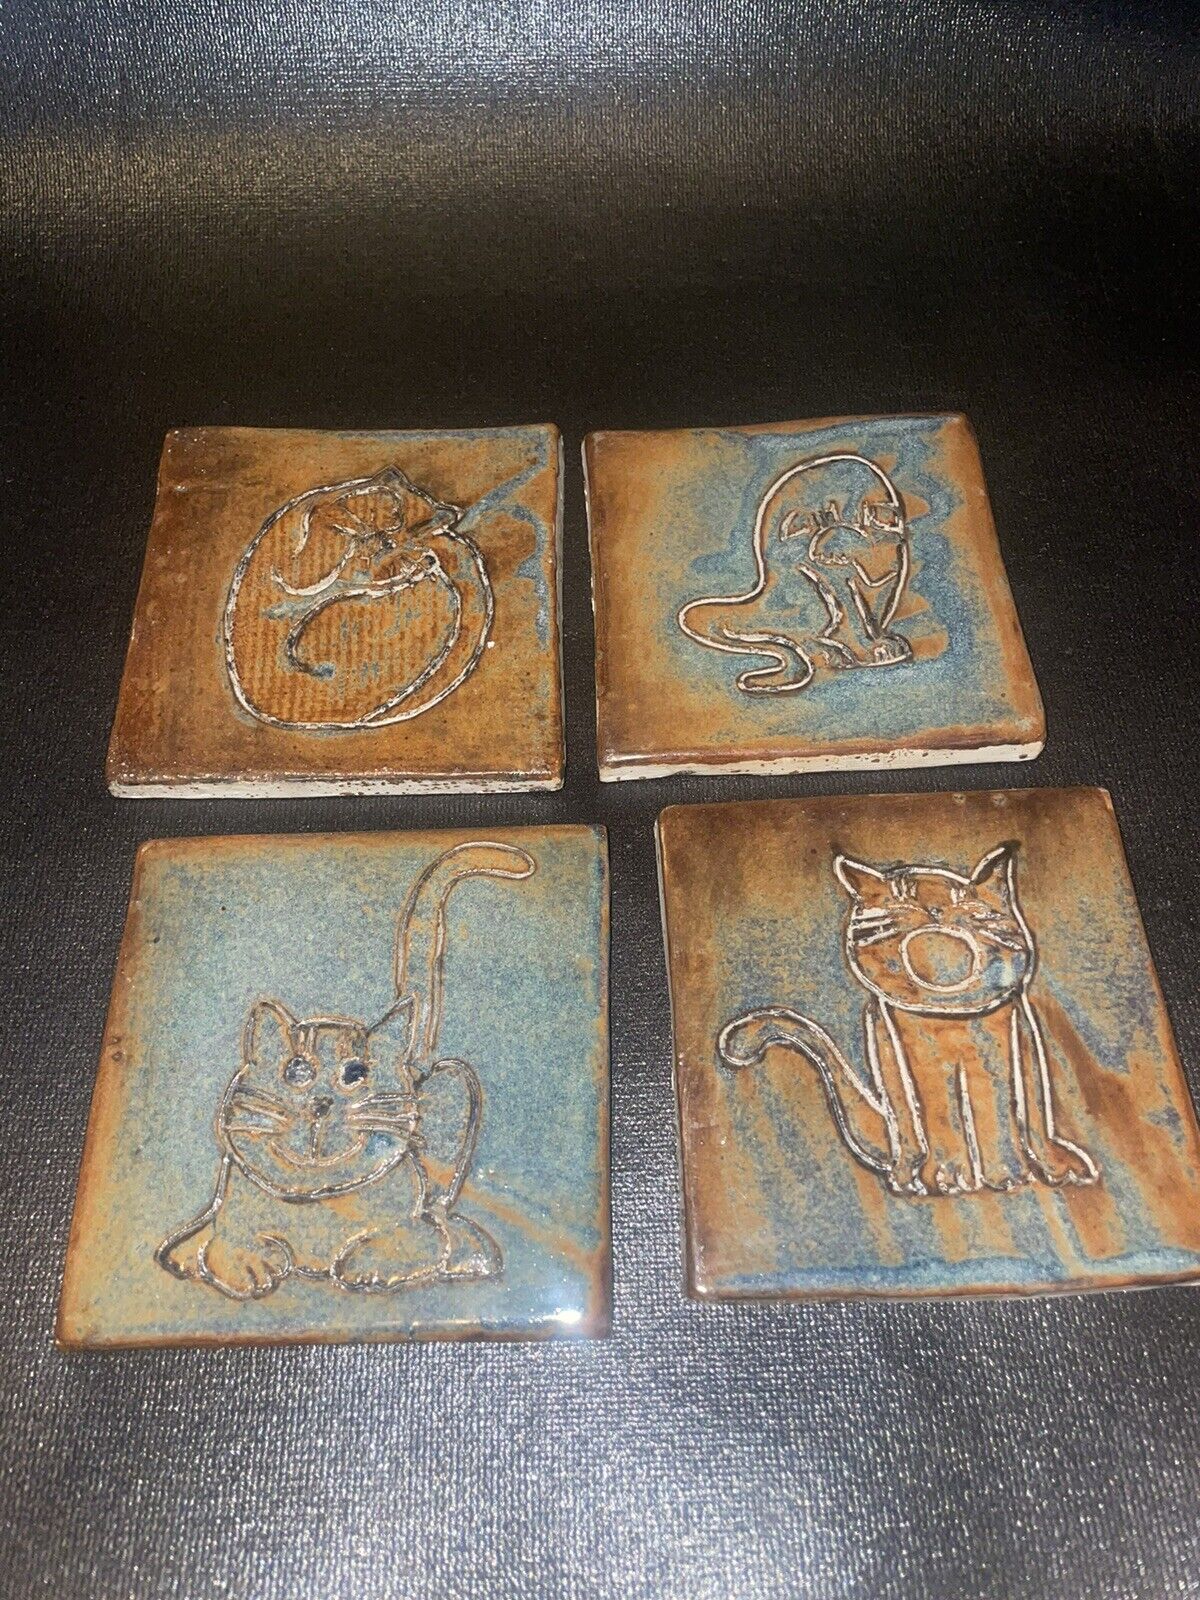 Vintage Mexican Tiles Hand-Crafted Kitty Cat Clay Pottery Tiles 4pc Set